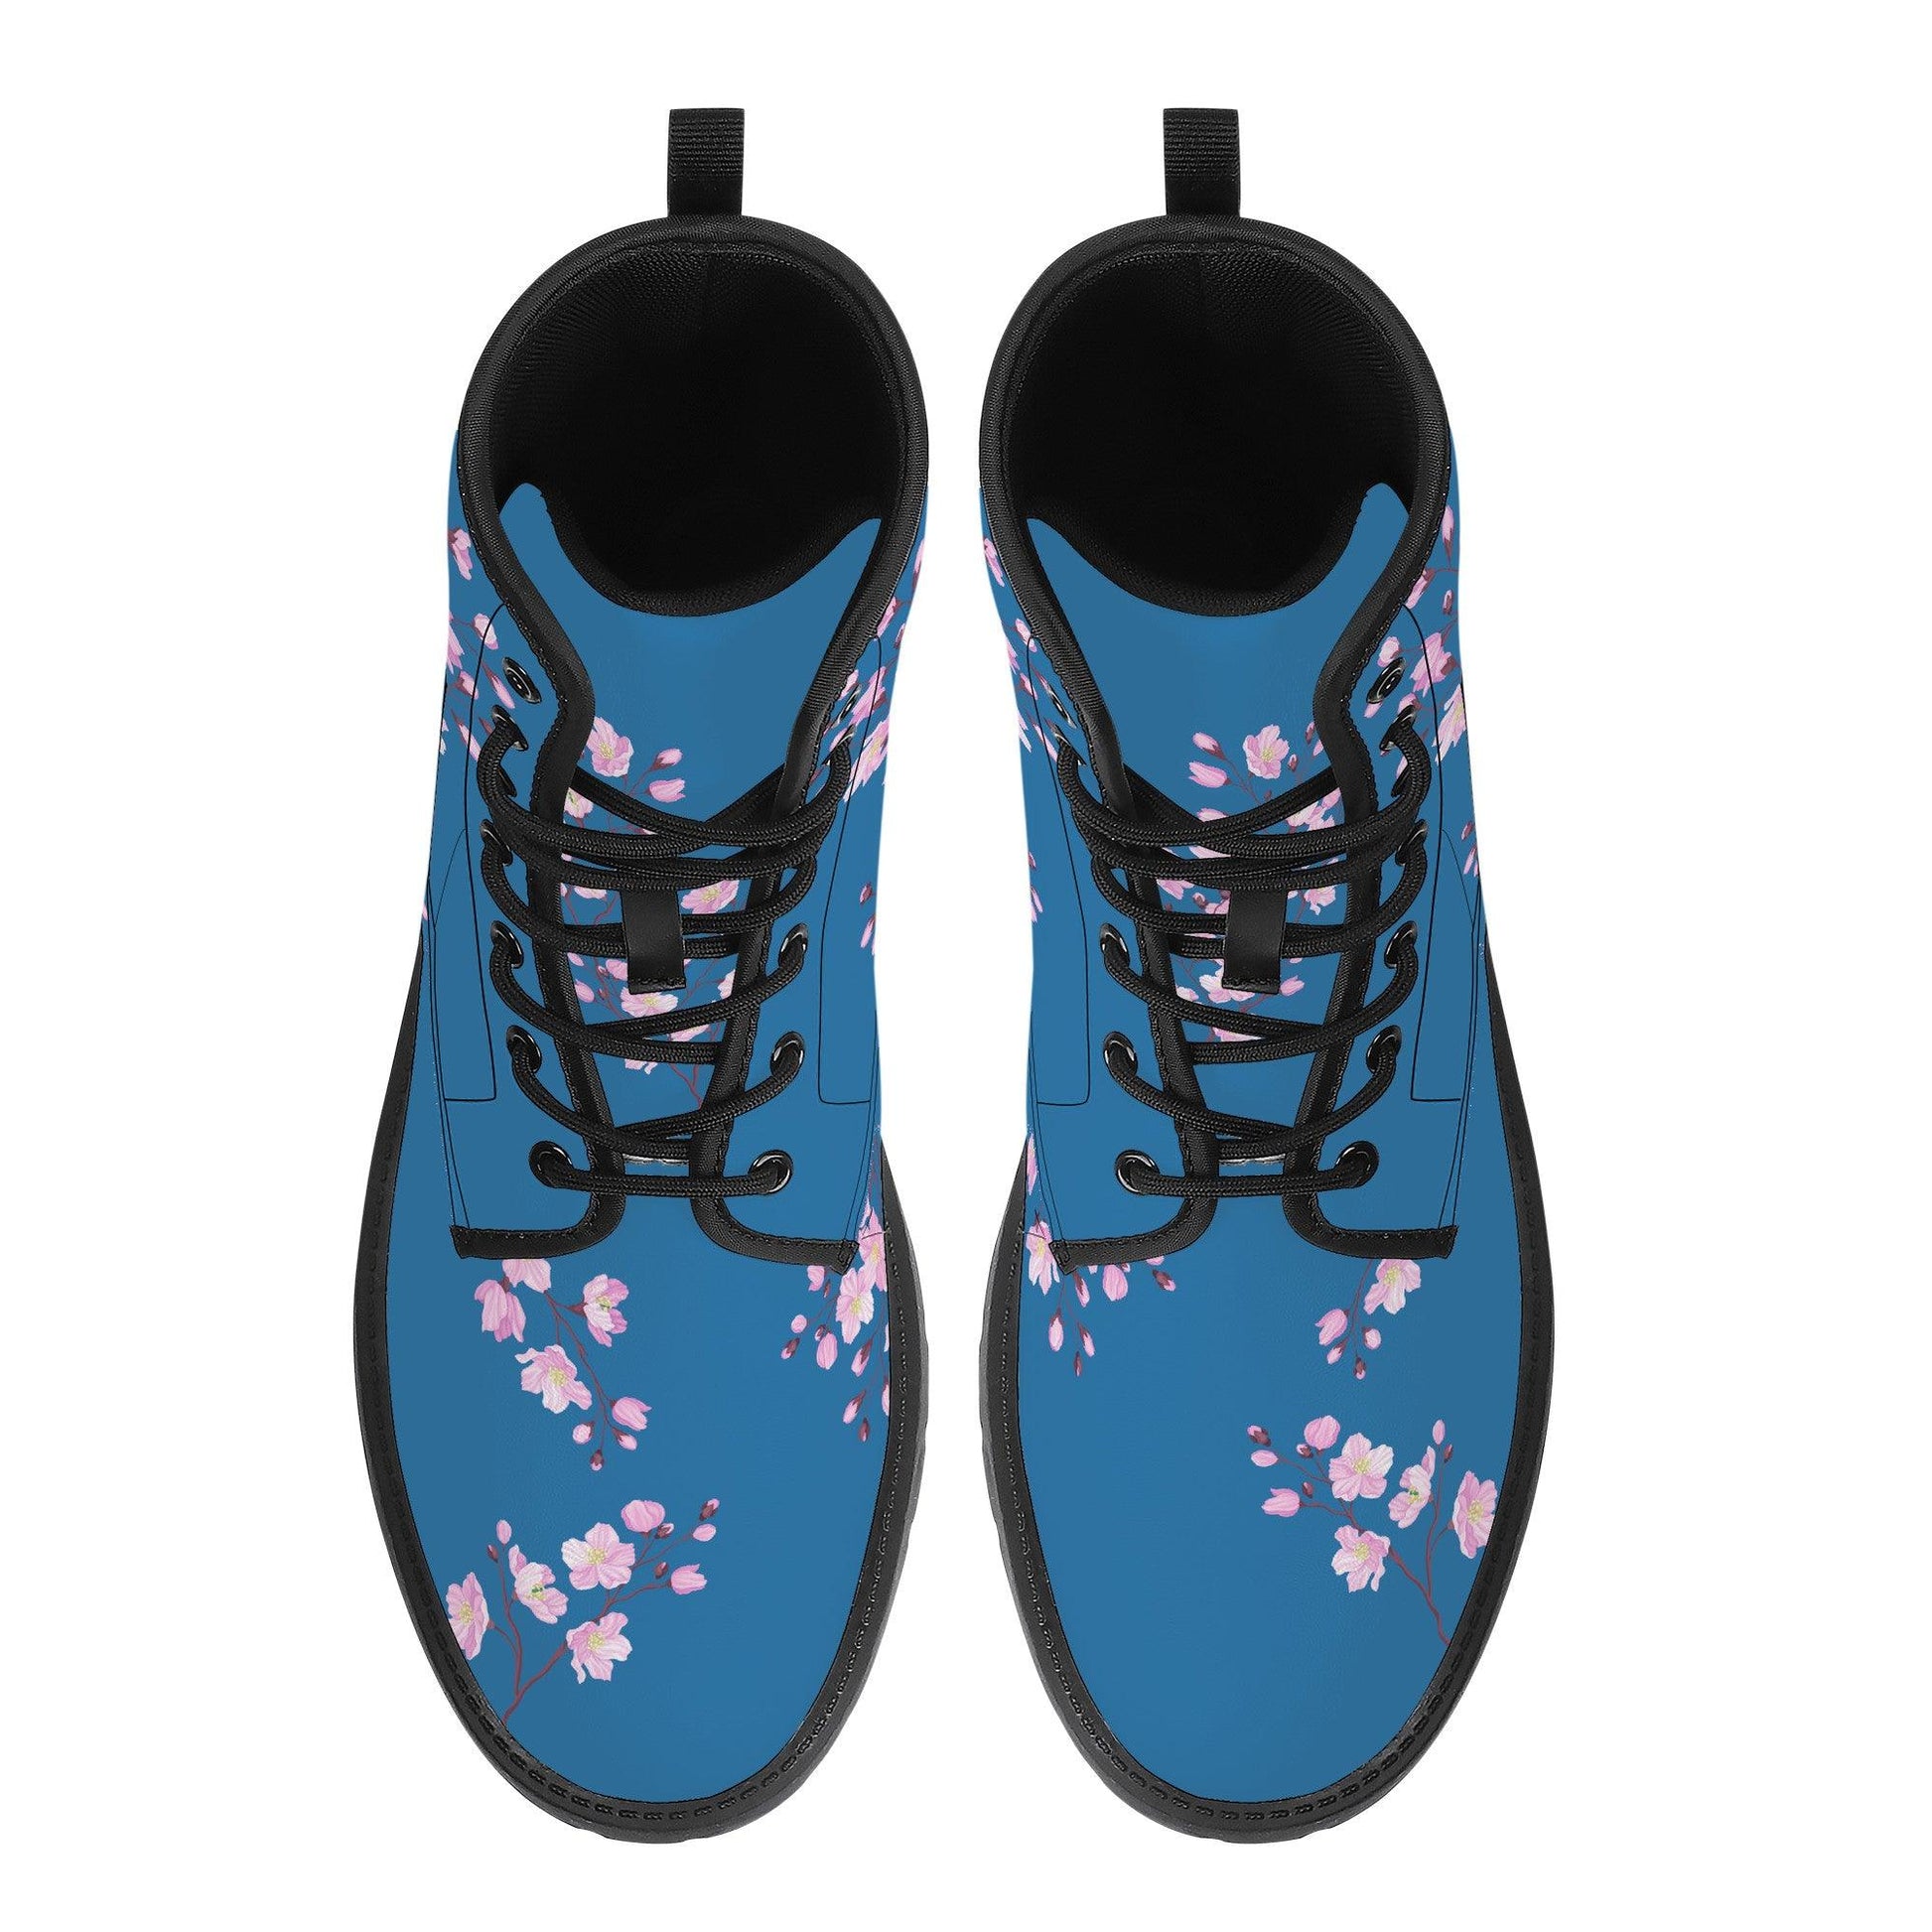 Teal Blue Vegan Leather Boots with Cherry Blossom